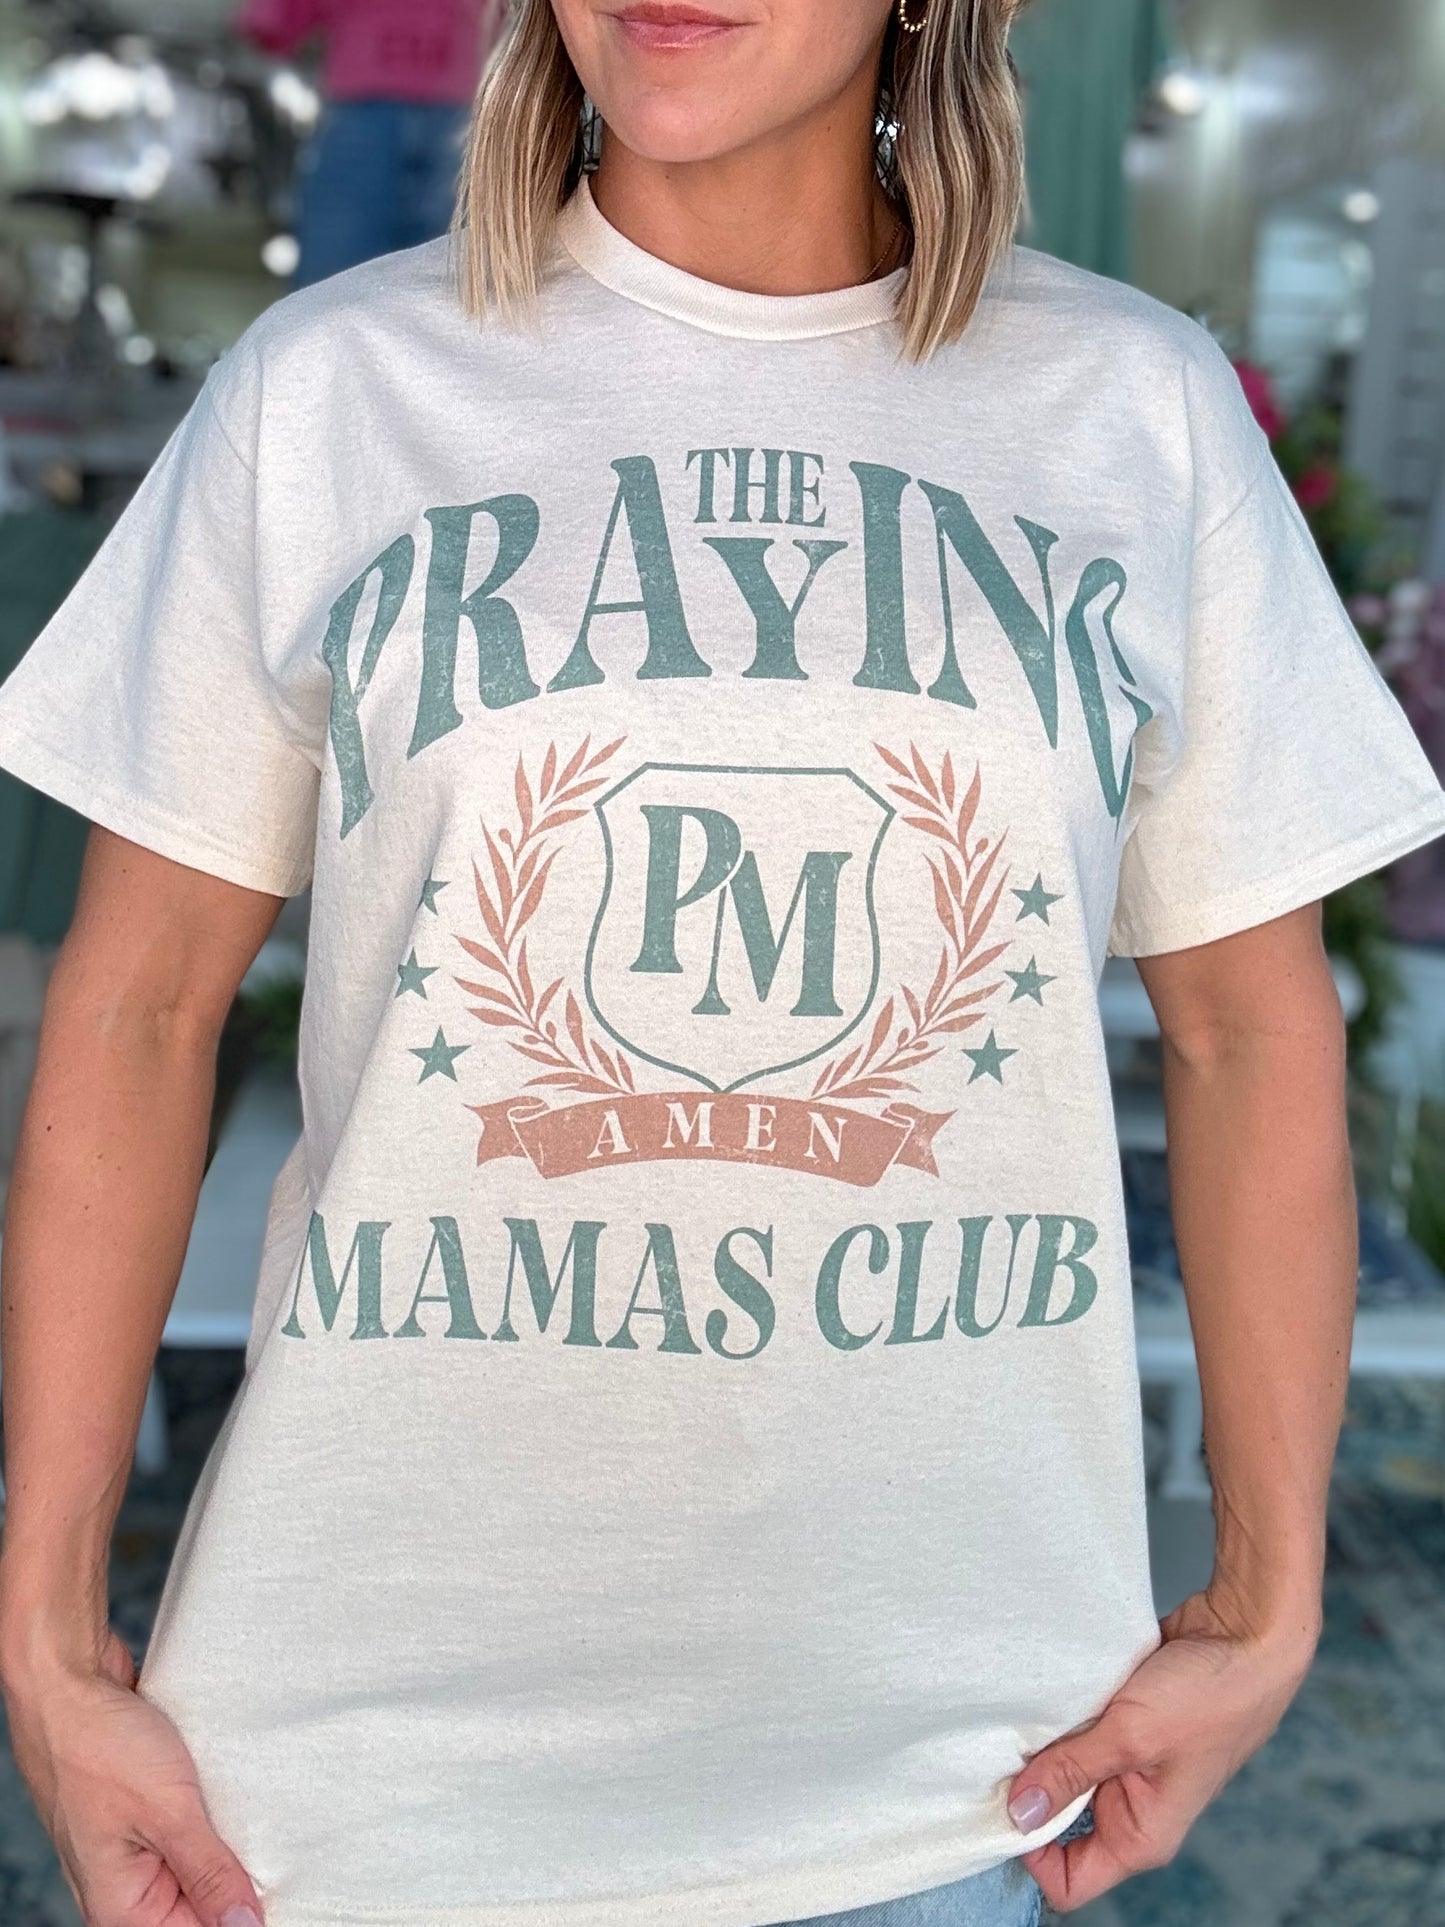 NEW! Praying Mamas Club oversized graphic tee in ivory